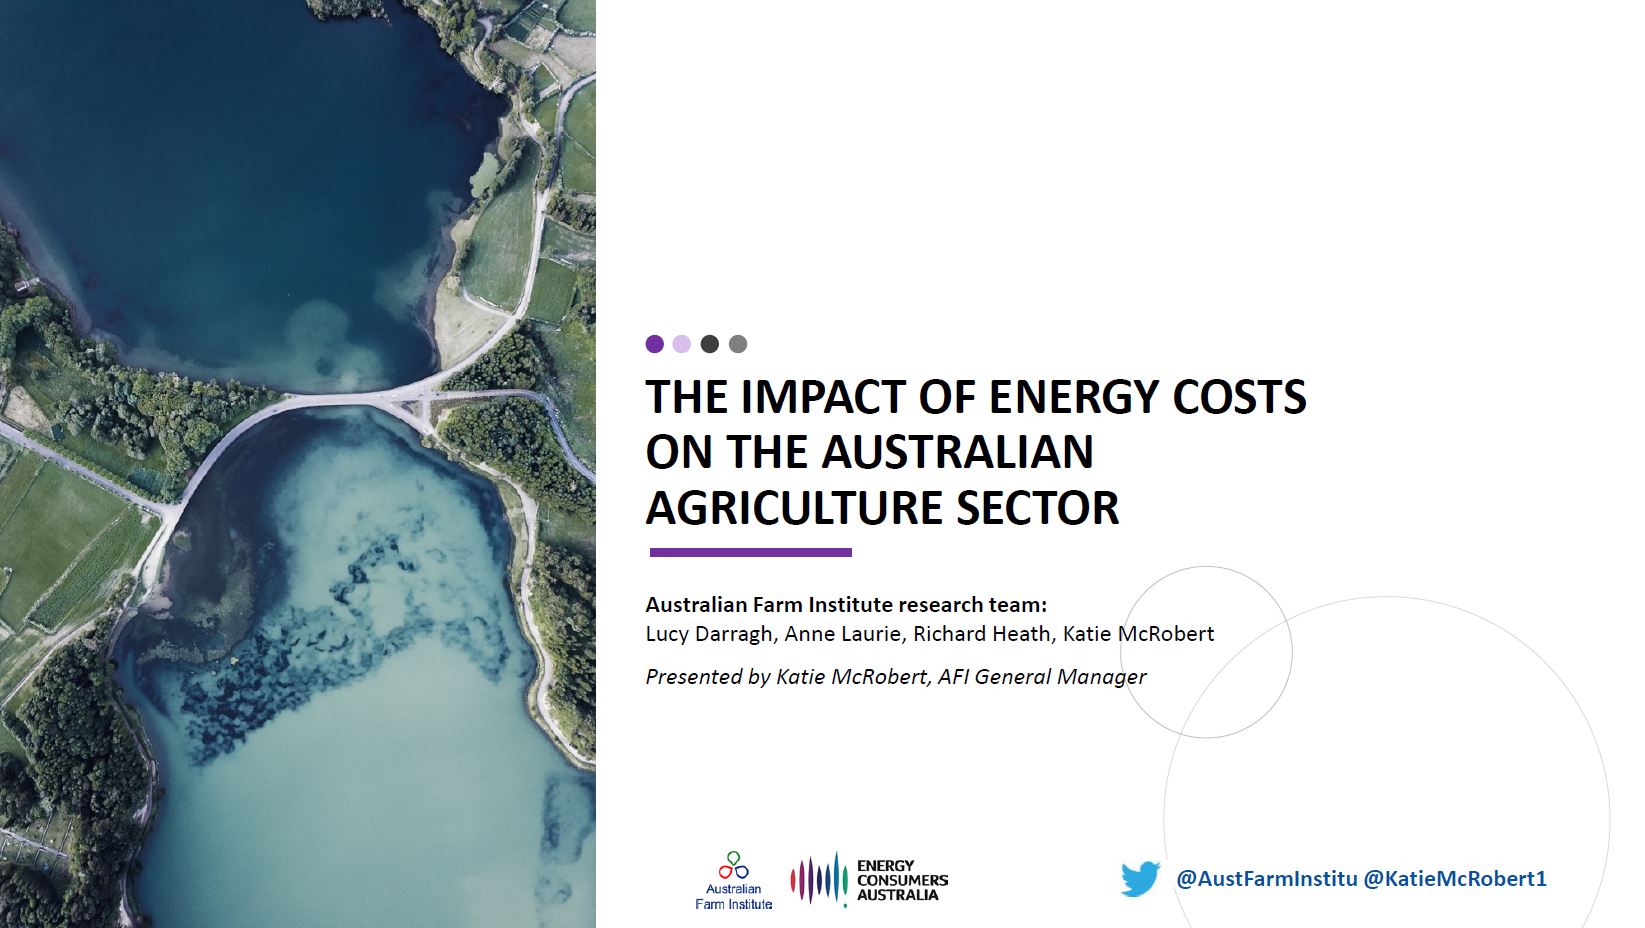 The Impacts of Energy Cost on the Australian Agriculture Sector